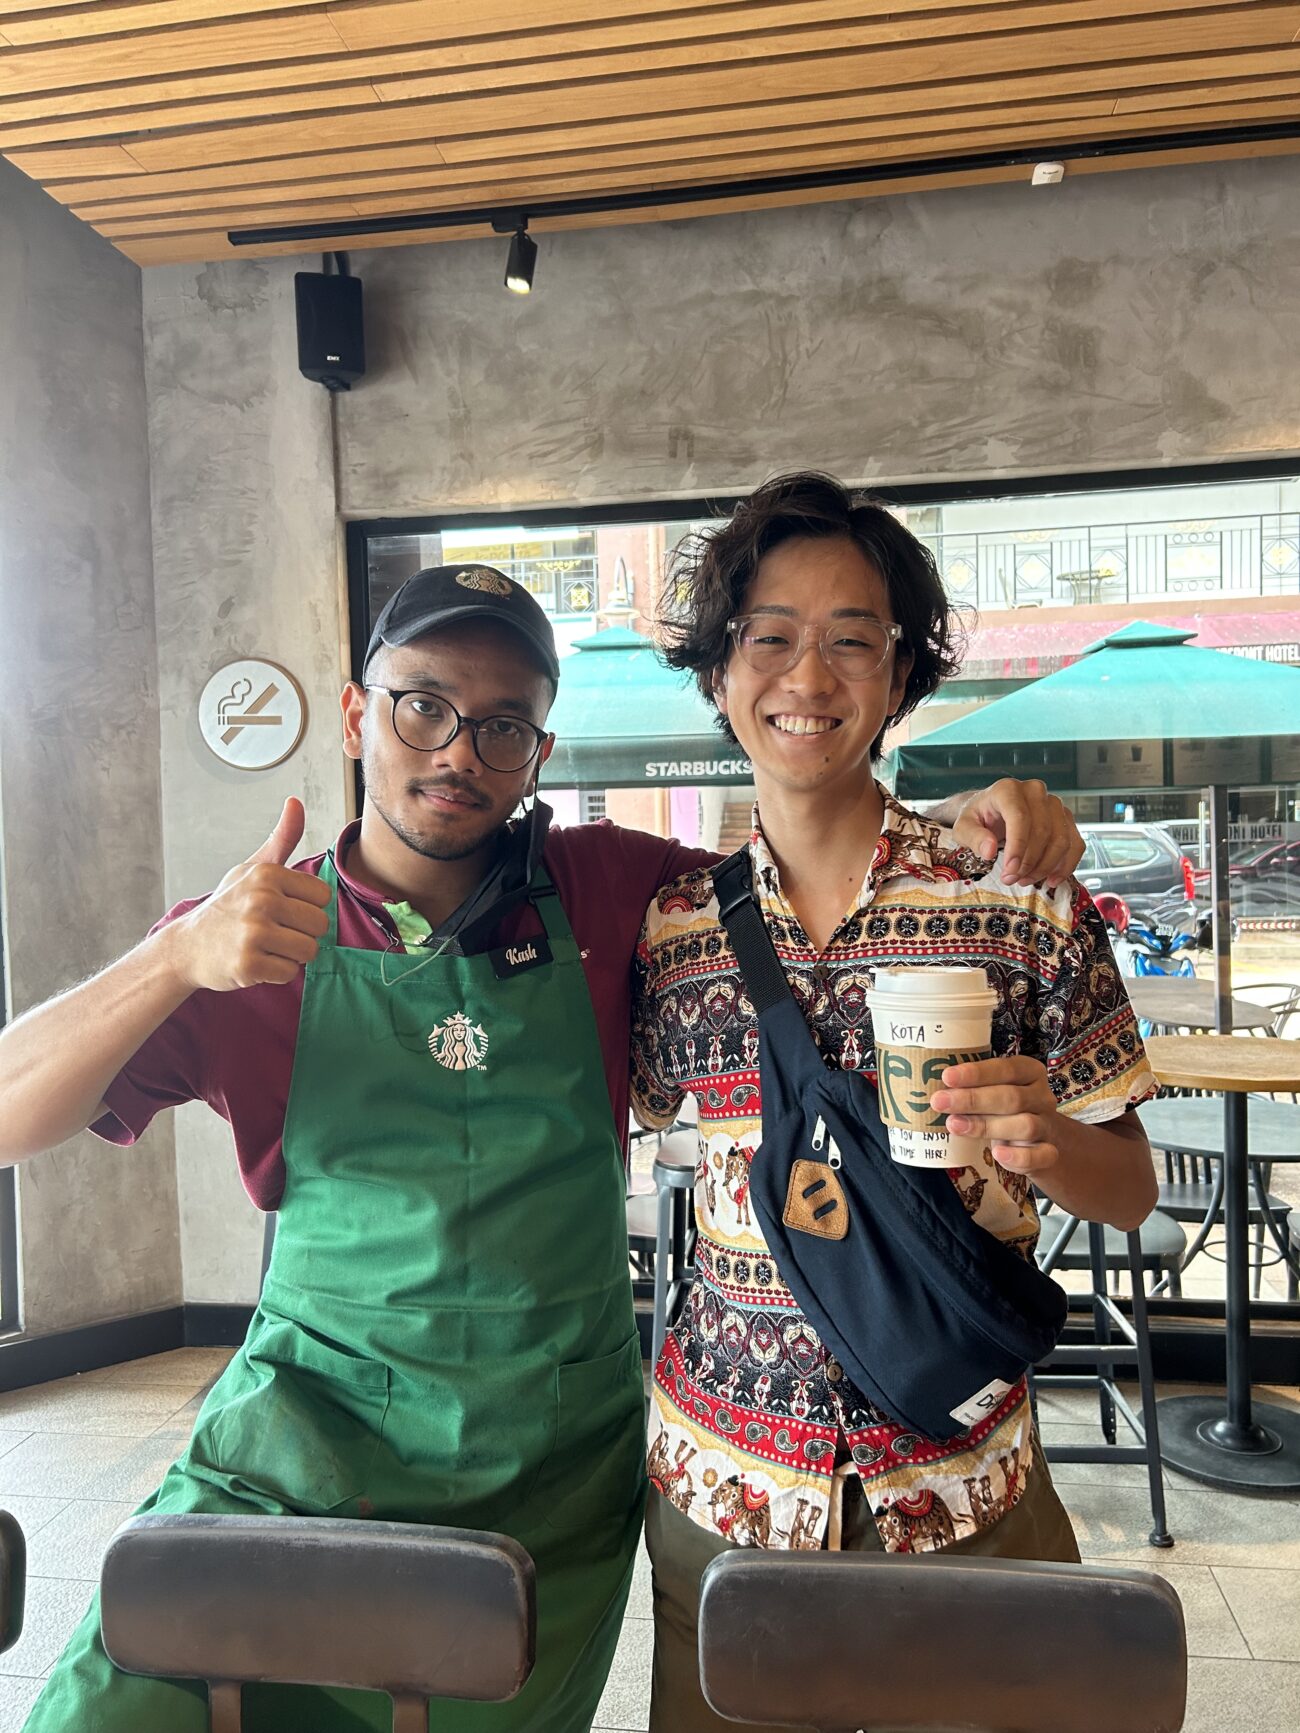 I meet the most amazing barista ever